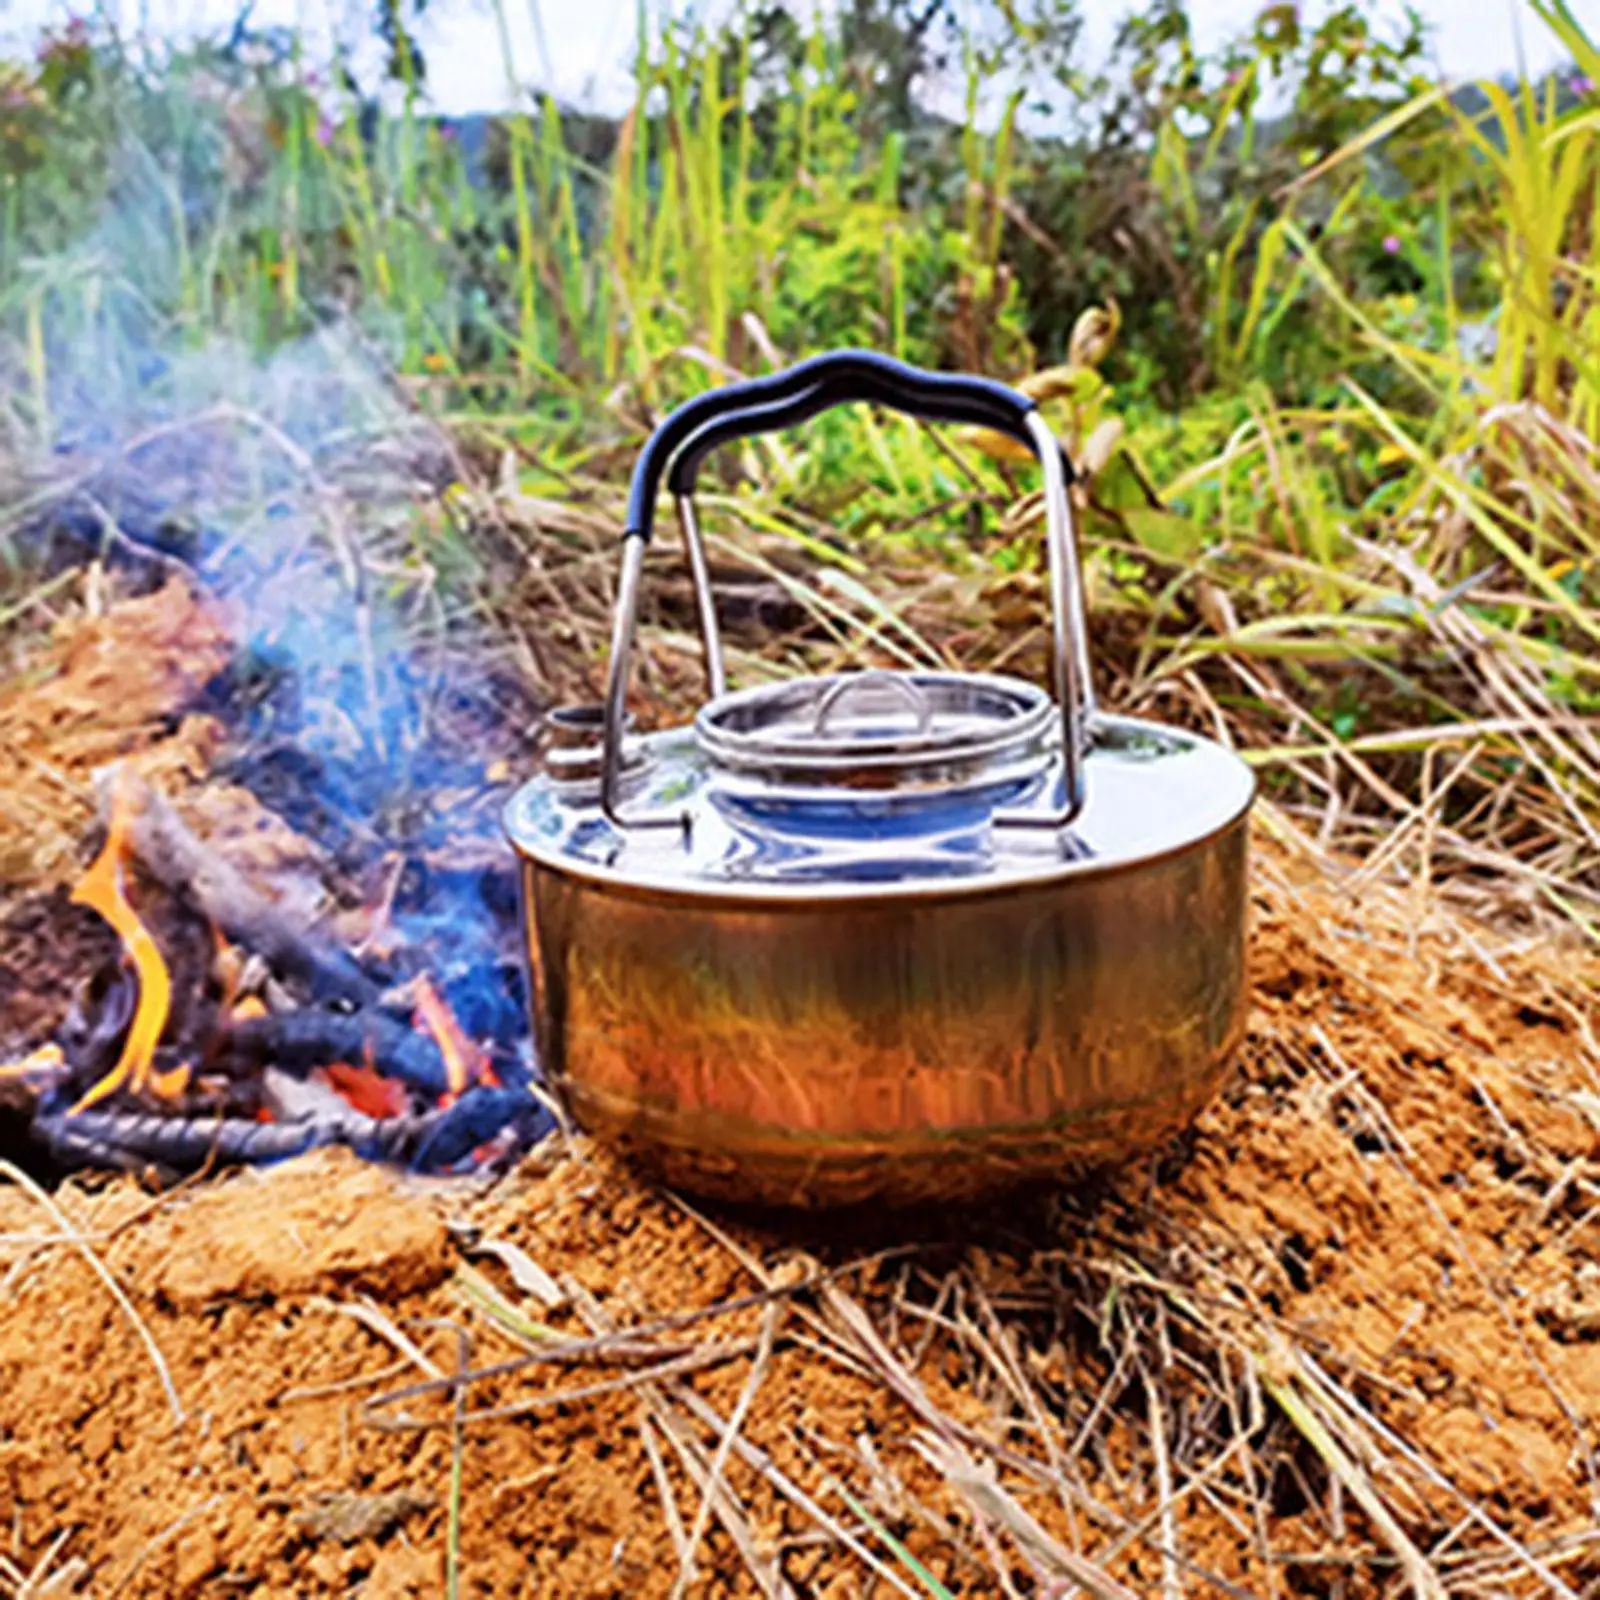 1.5L Camping Kettle Tea Pot Outdoor Kettle Campfire Kettle Coffee Pot Cookware for Backpacking Camping Outdoor Hiking